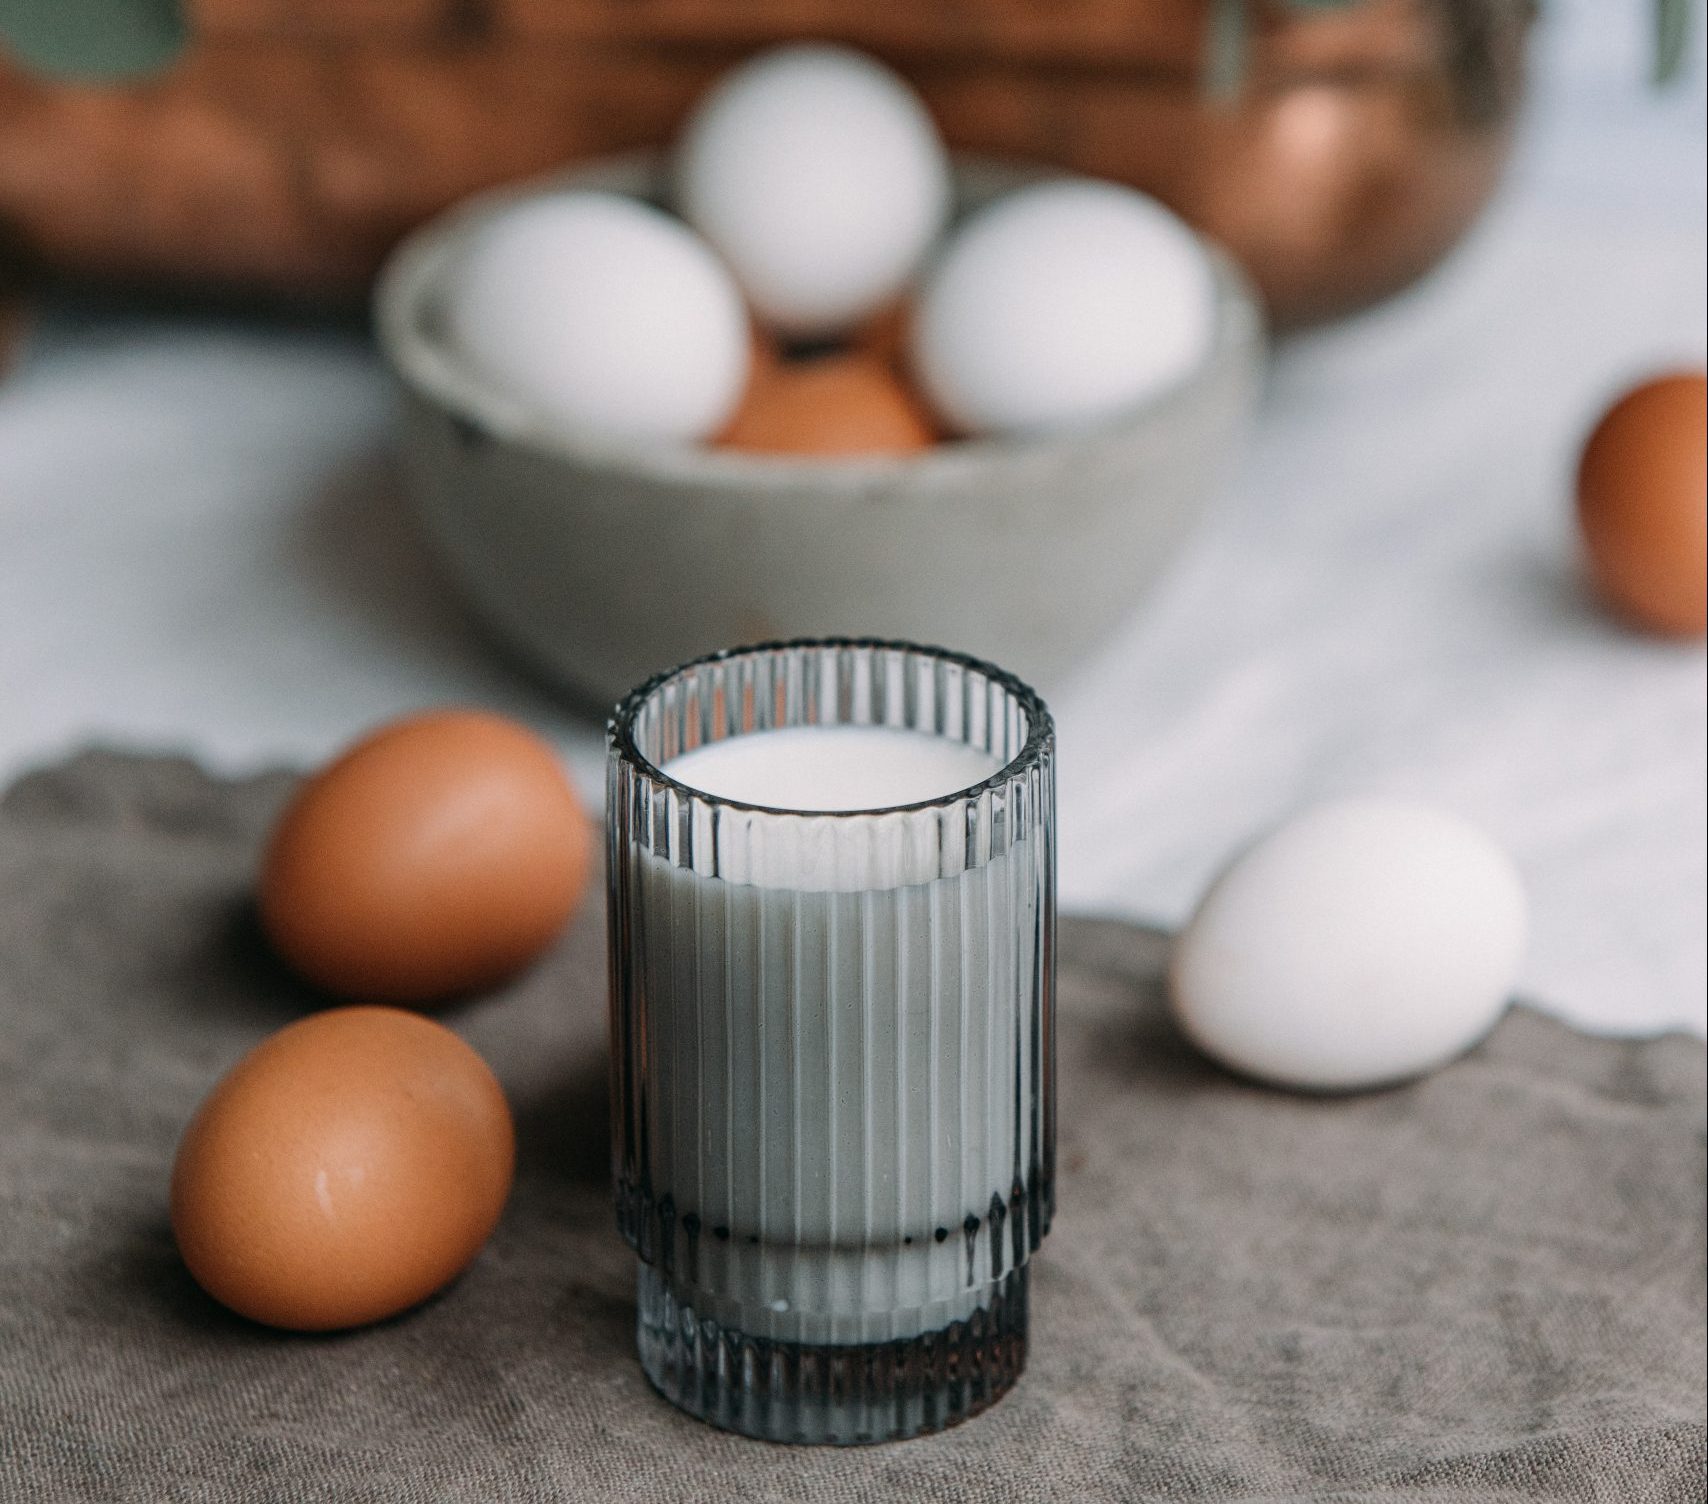 Preserving Eggs and Milk for Long-Term Storage